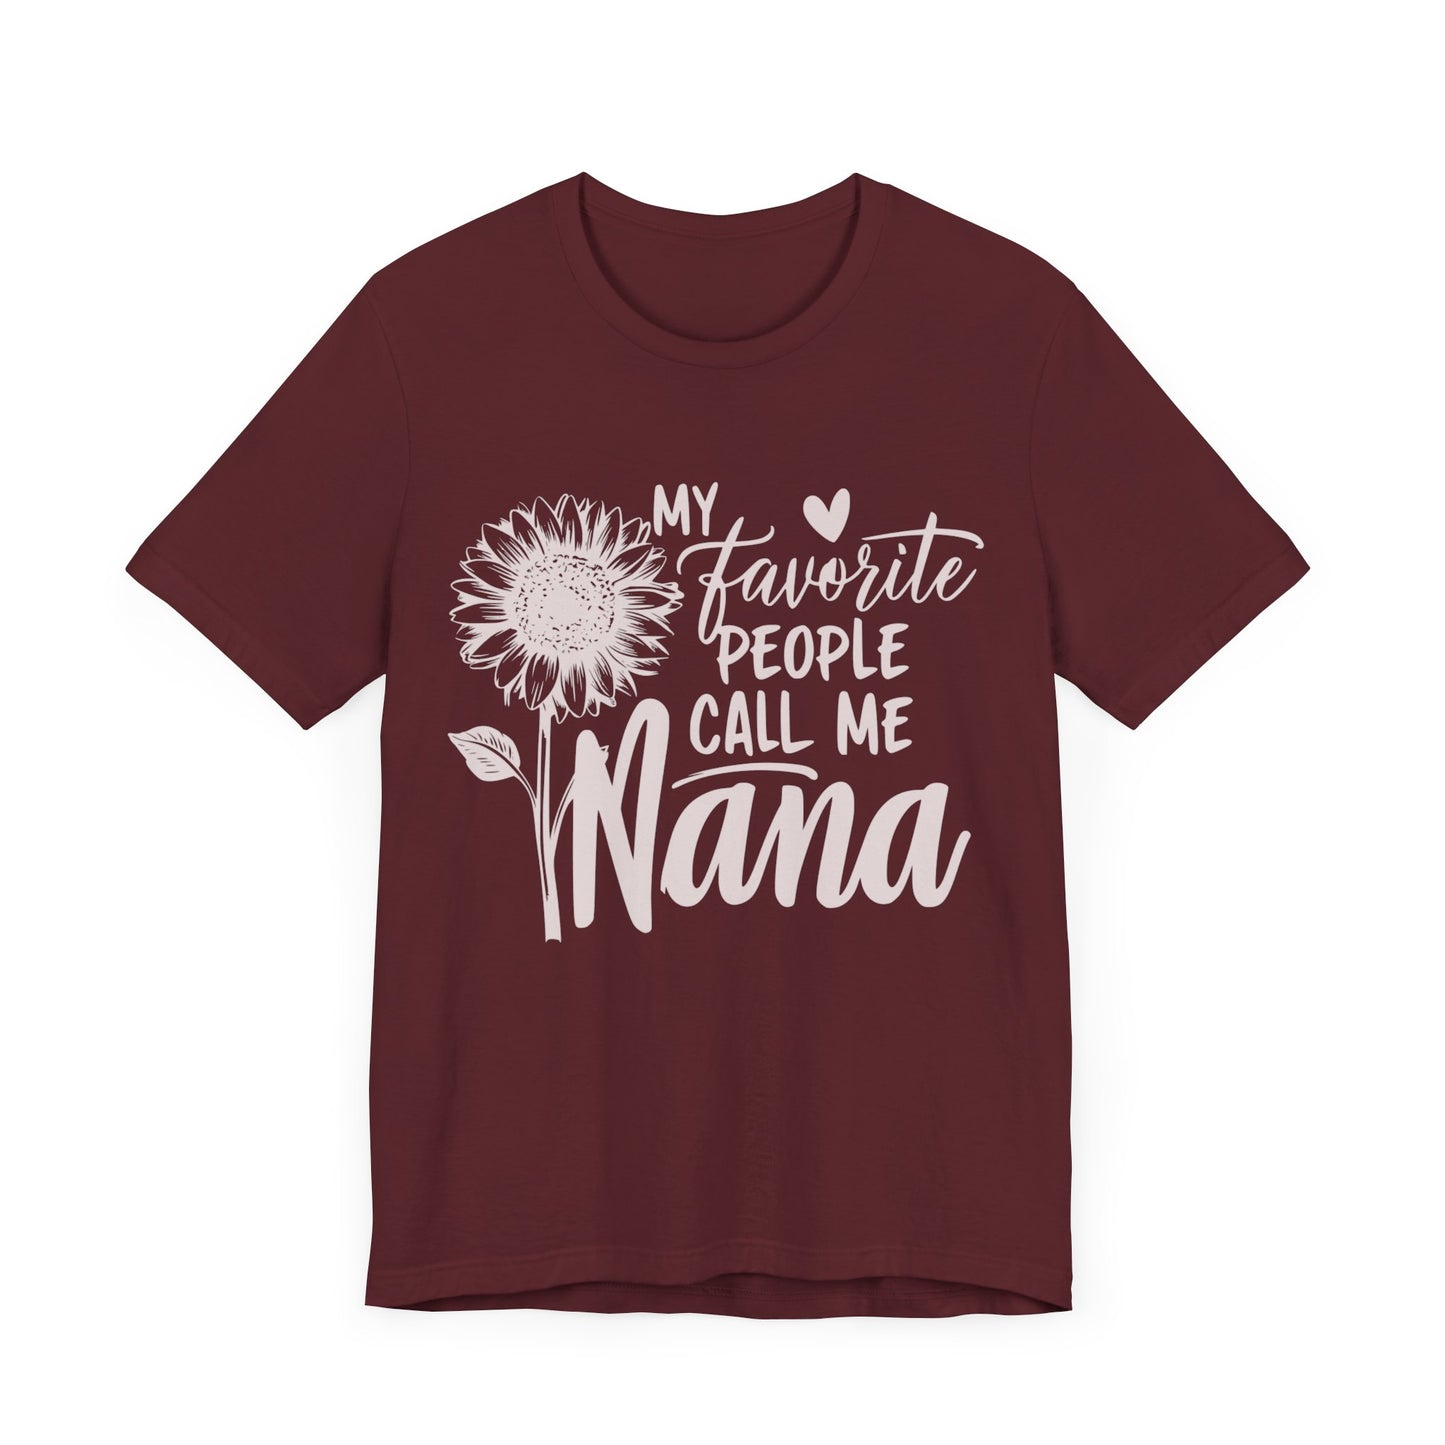 "Ethically Made Nana T-Shirt with Floral Typography"